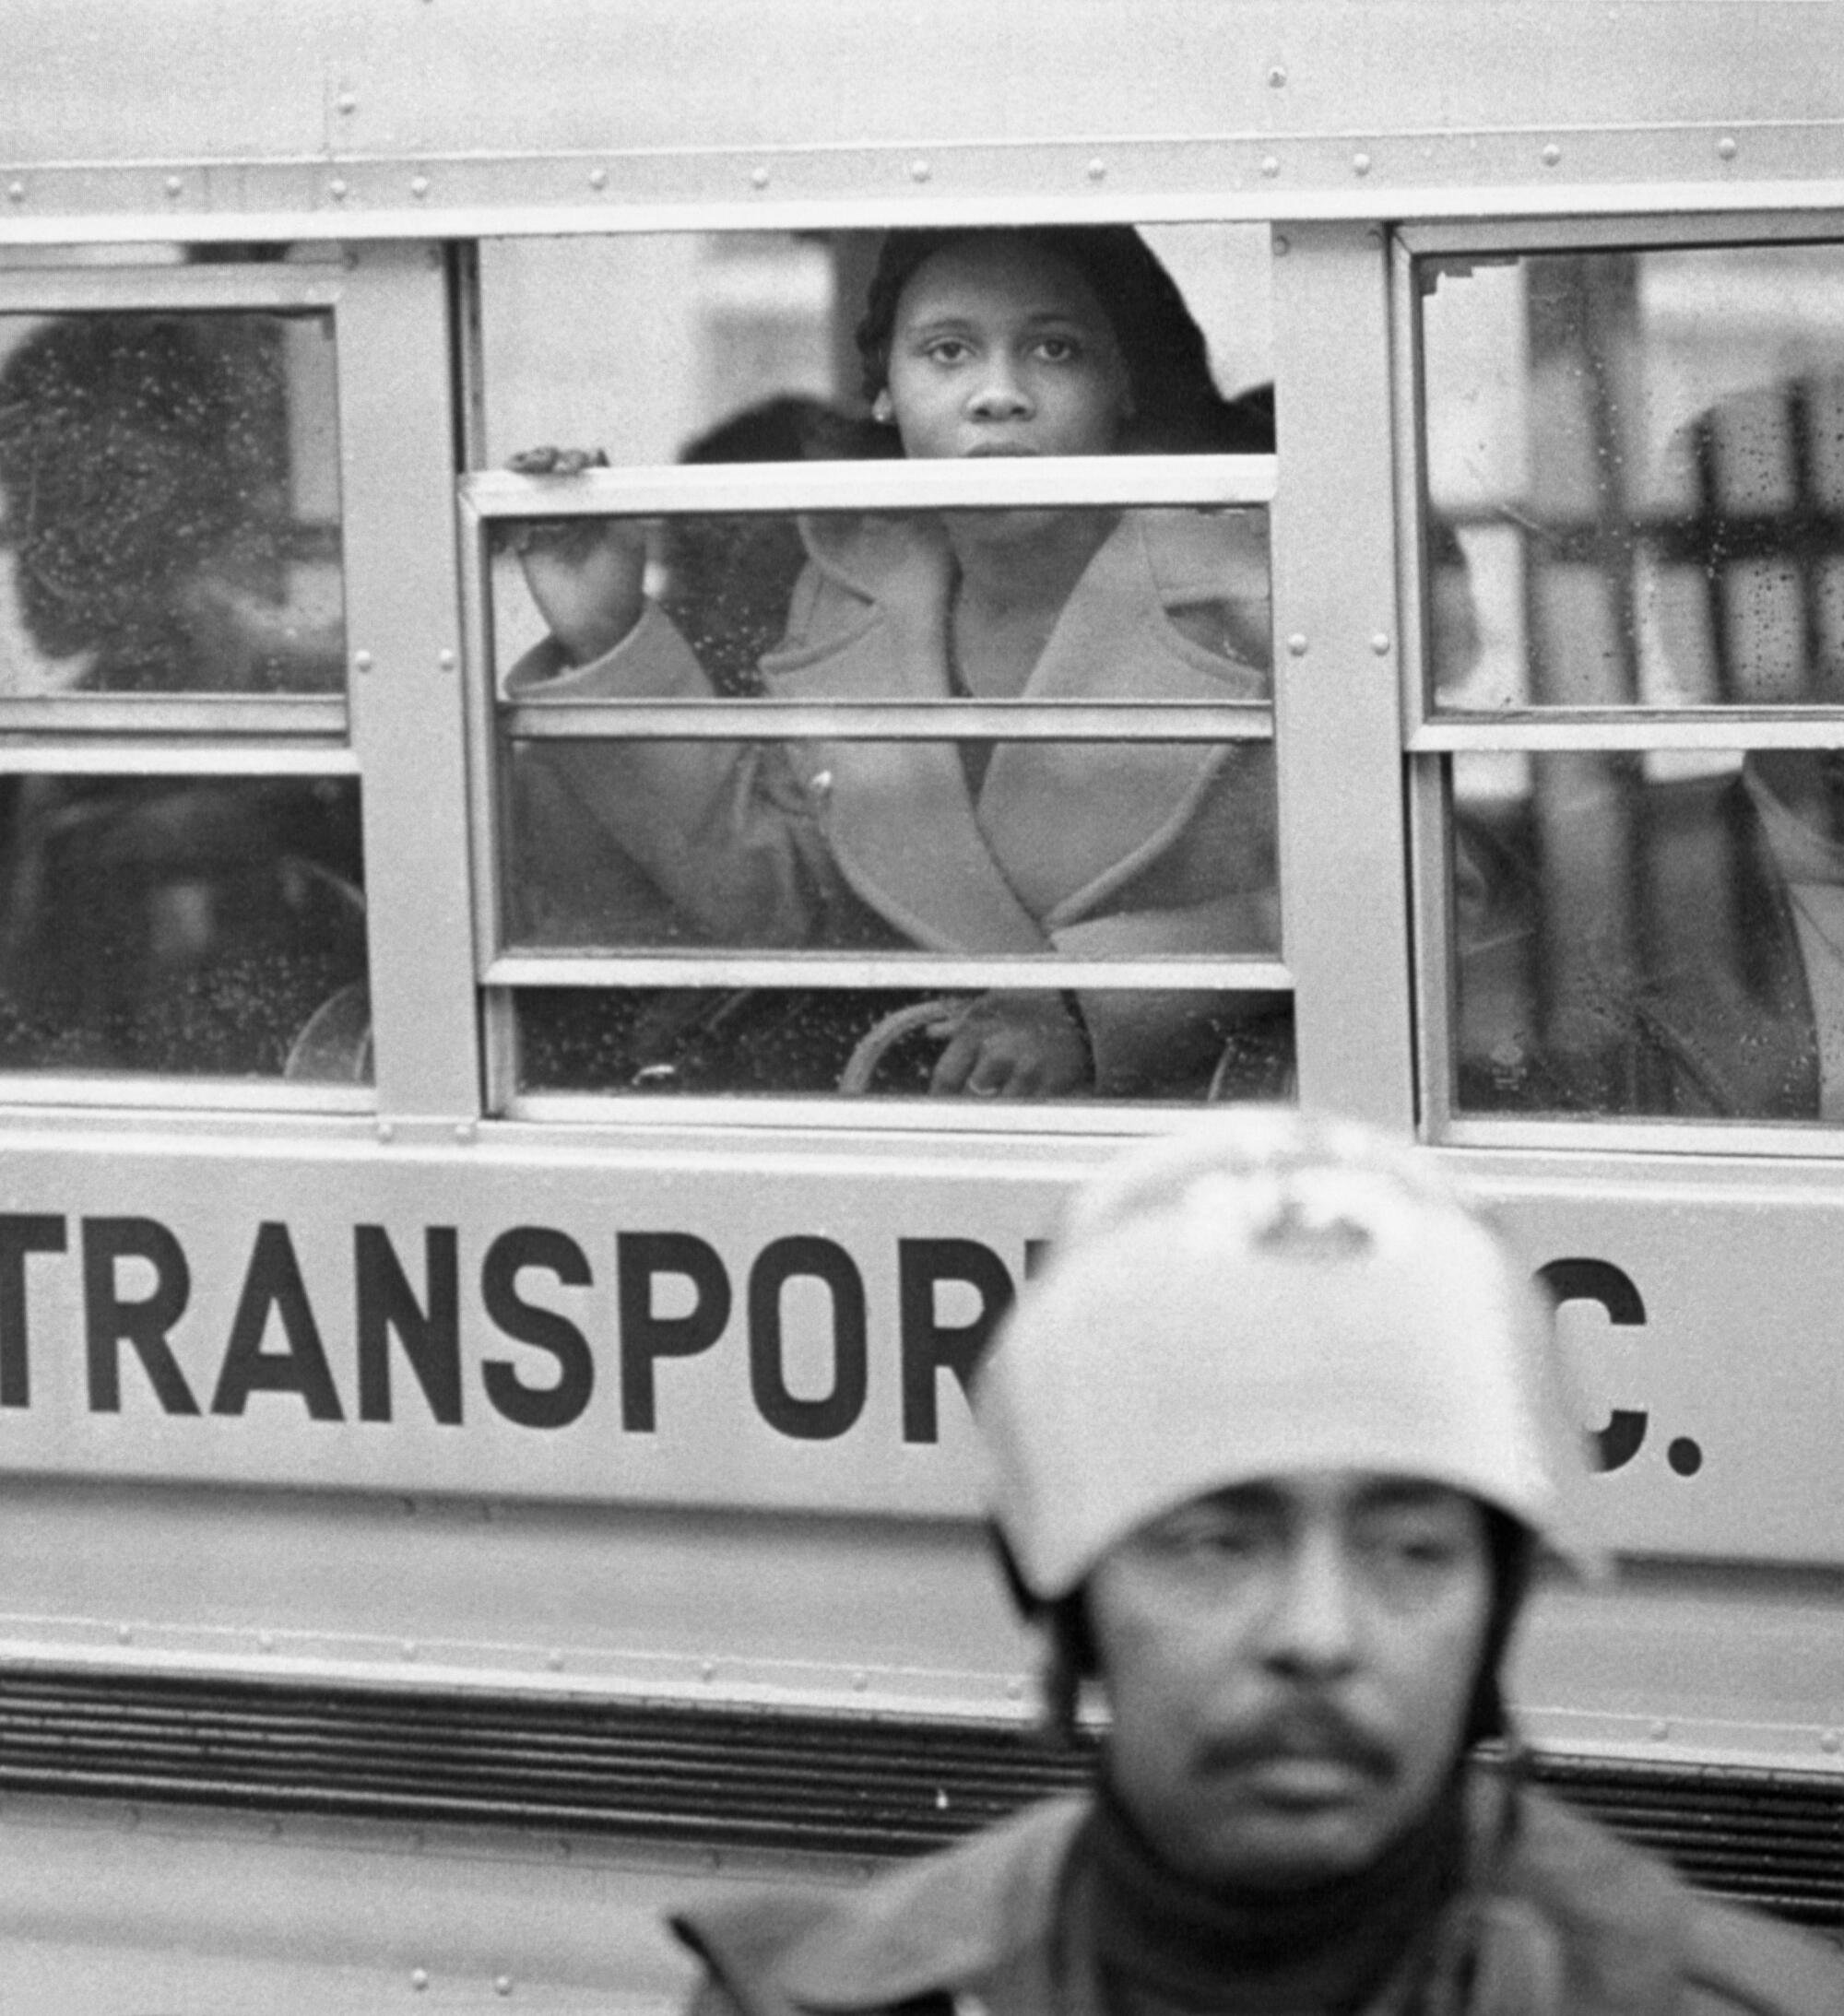 A student looks out the window of a school bus while a police officer stands in front of it.